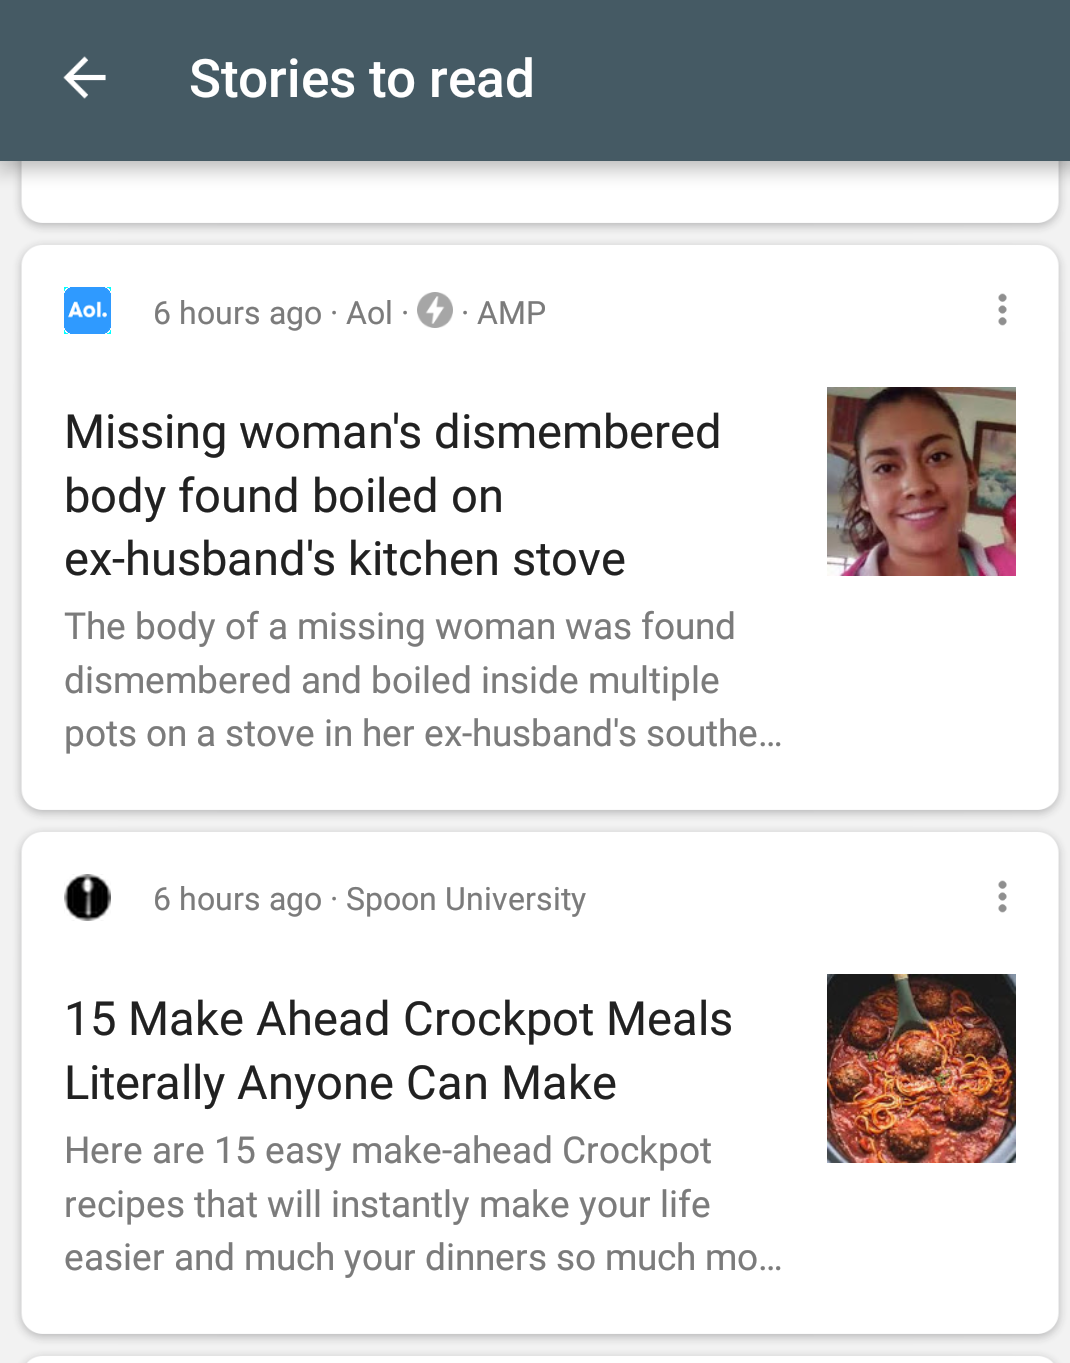 web page - f Stories to read Aol. 6 hours ago Aol 5 Amp Missing woman's dismembered body found boiled on exhusband's kitchen stove The body of a missing woman was found dismembered and boiled inside multiple pots on a stove in her exhusband's southe... 0 